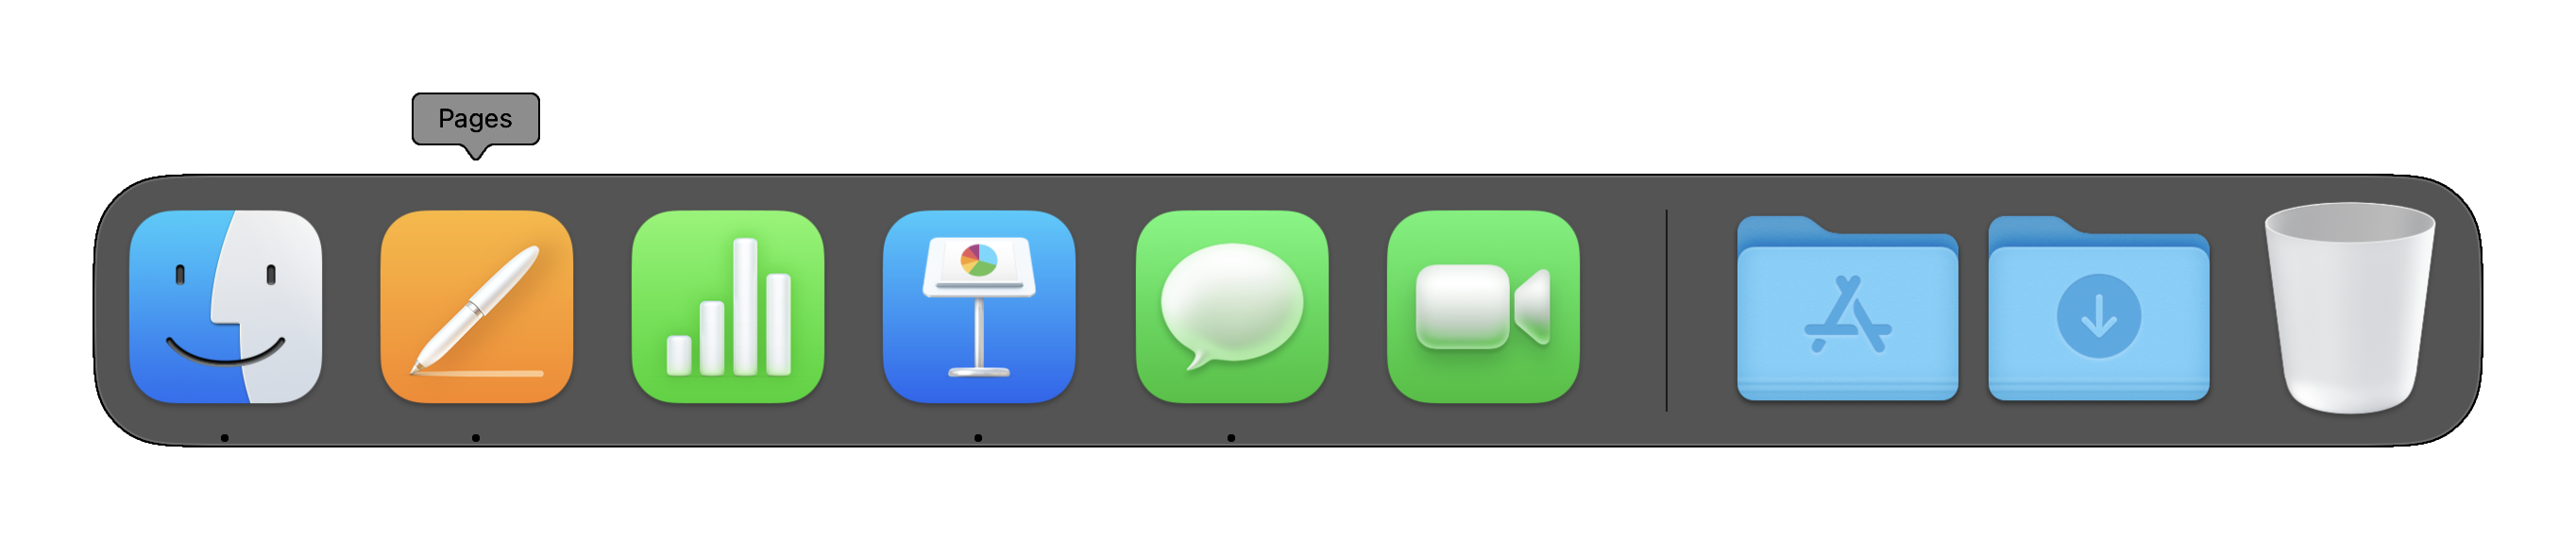 The Dock and active applications shown with a black dot.